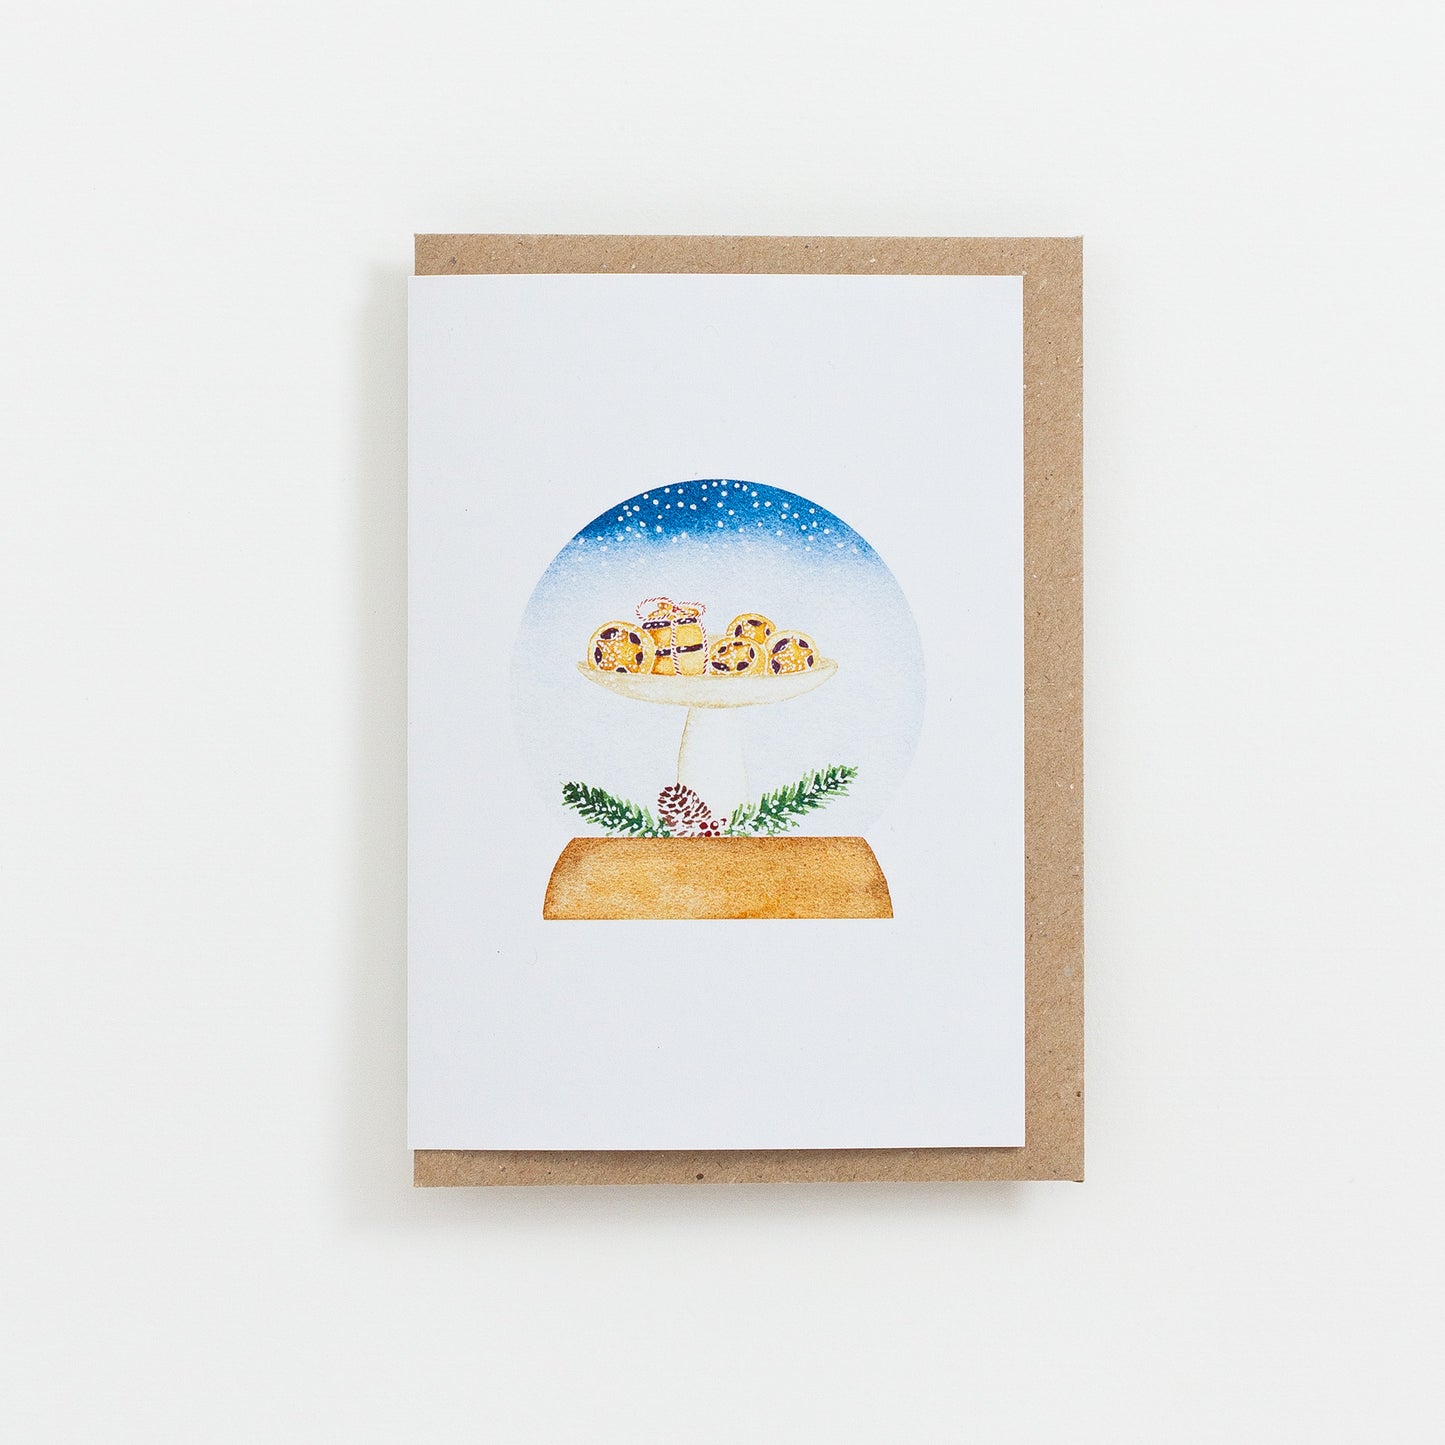 A festive food Snow Globe card designed from handmade watercolour painting. The illustration is a tall dish filled with little mince pies dusted with icing sugar.